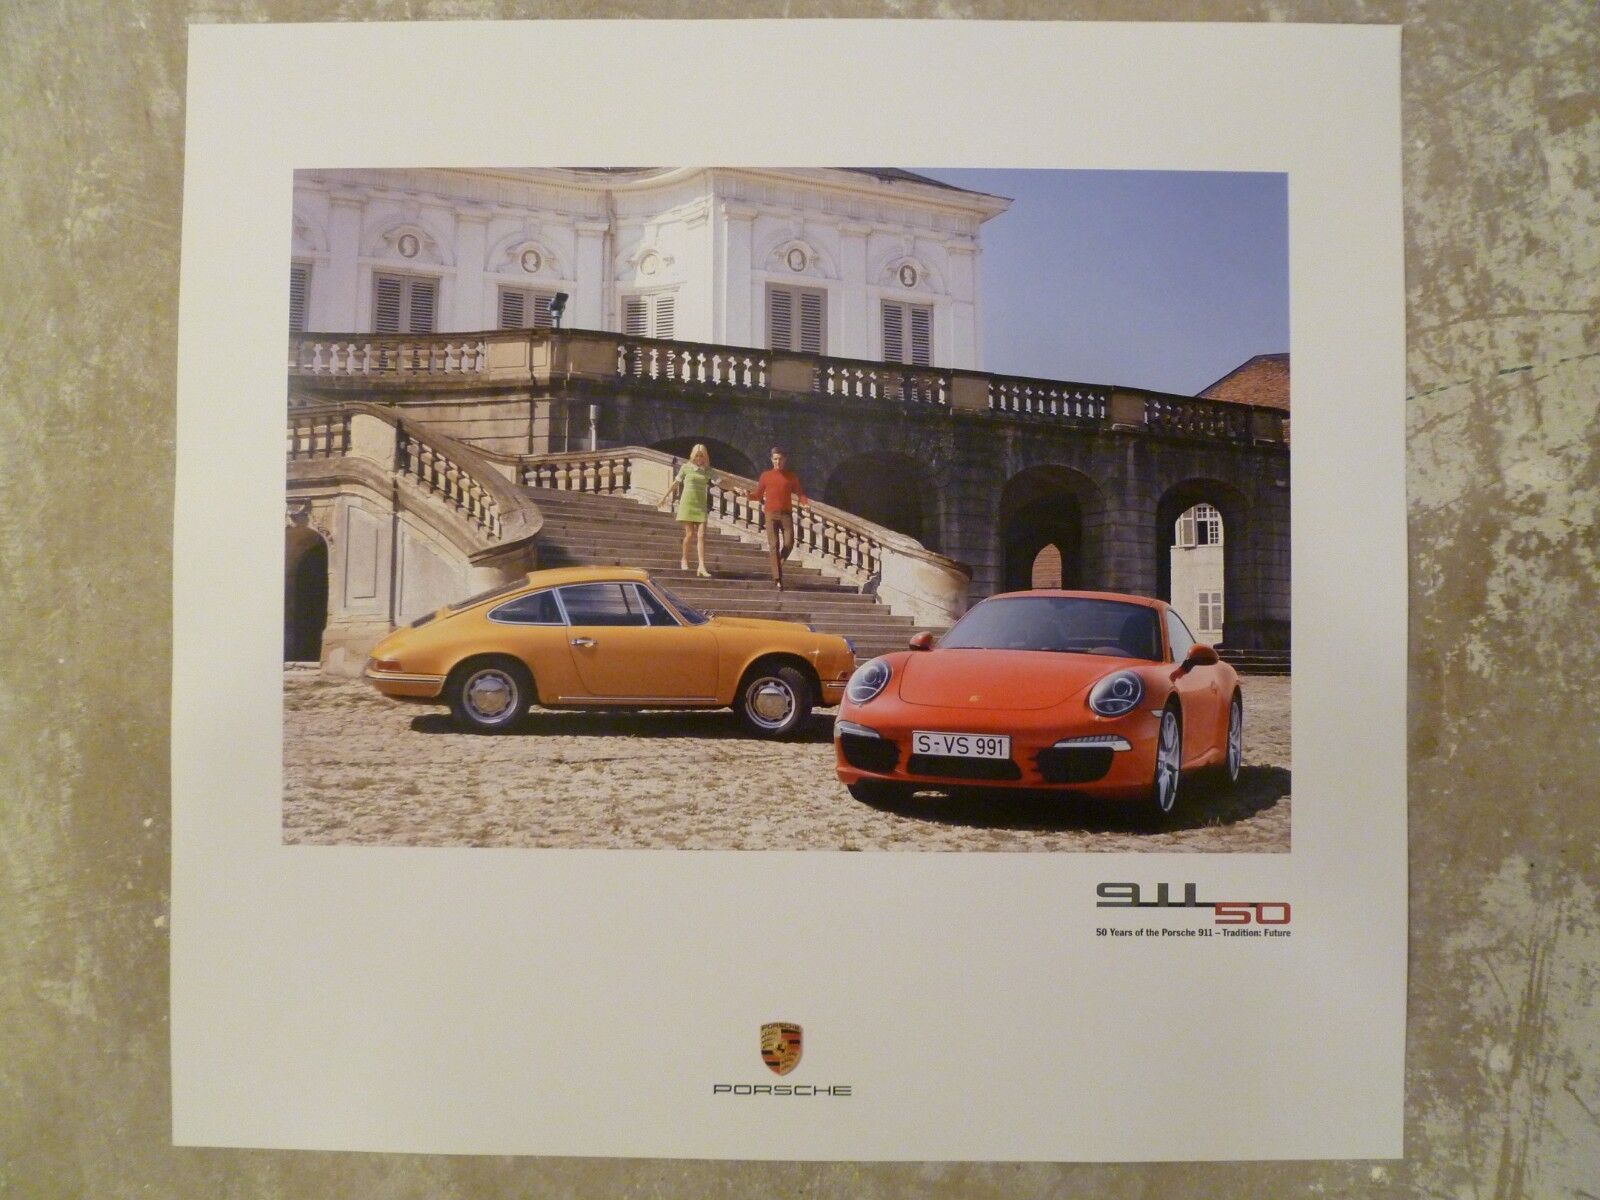 2014 Porsche 911 50th Anniversary Showroom Advertising Poster RARE Awesome L@@K